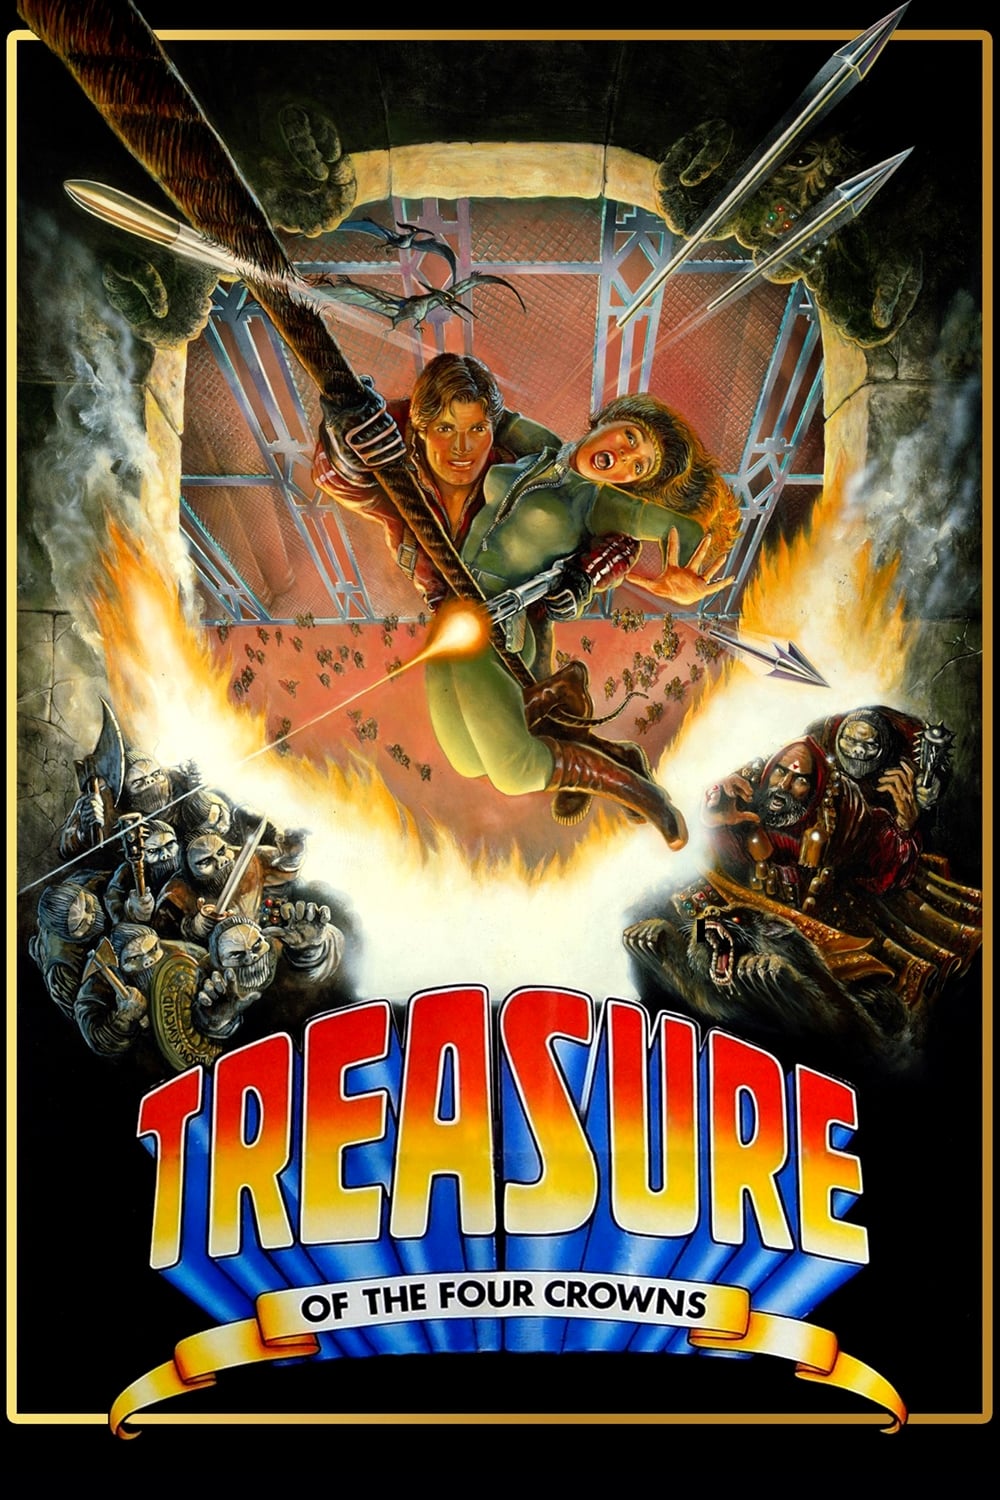 Treasure of the Four Crowns (1983)